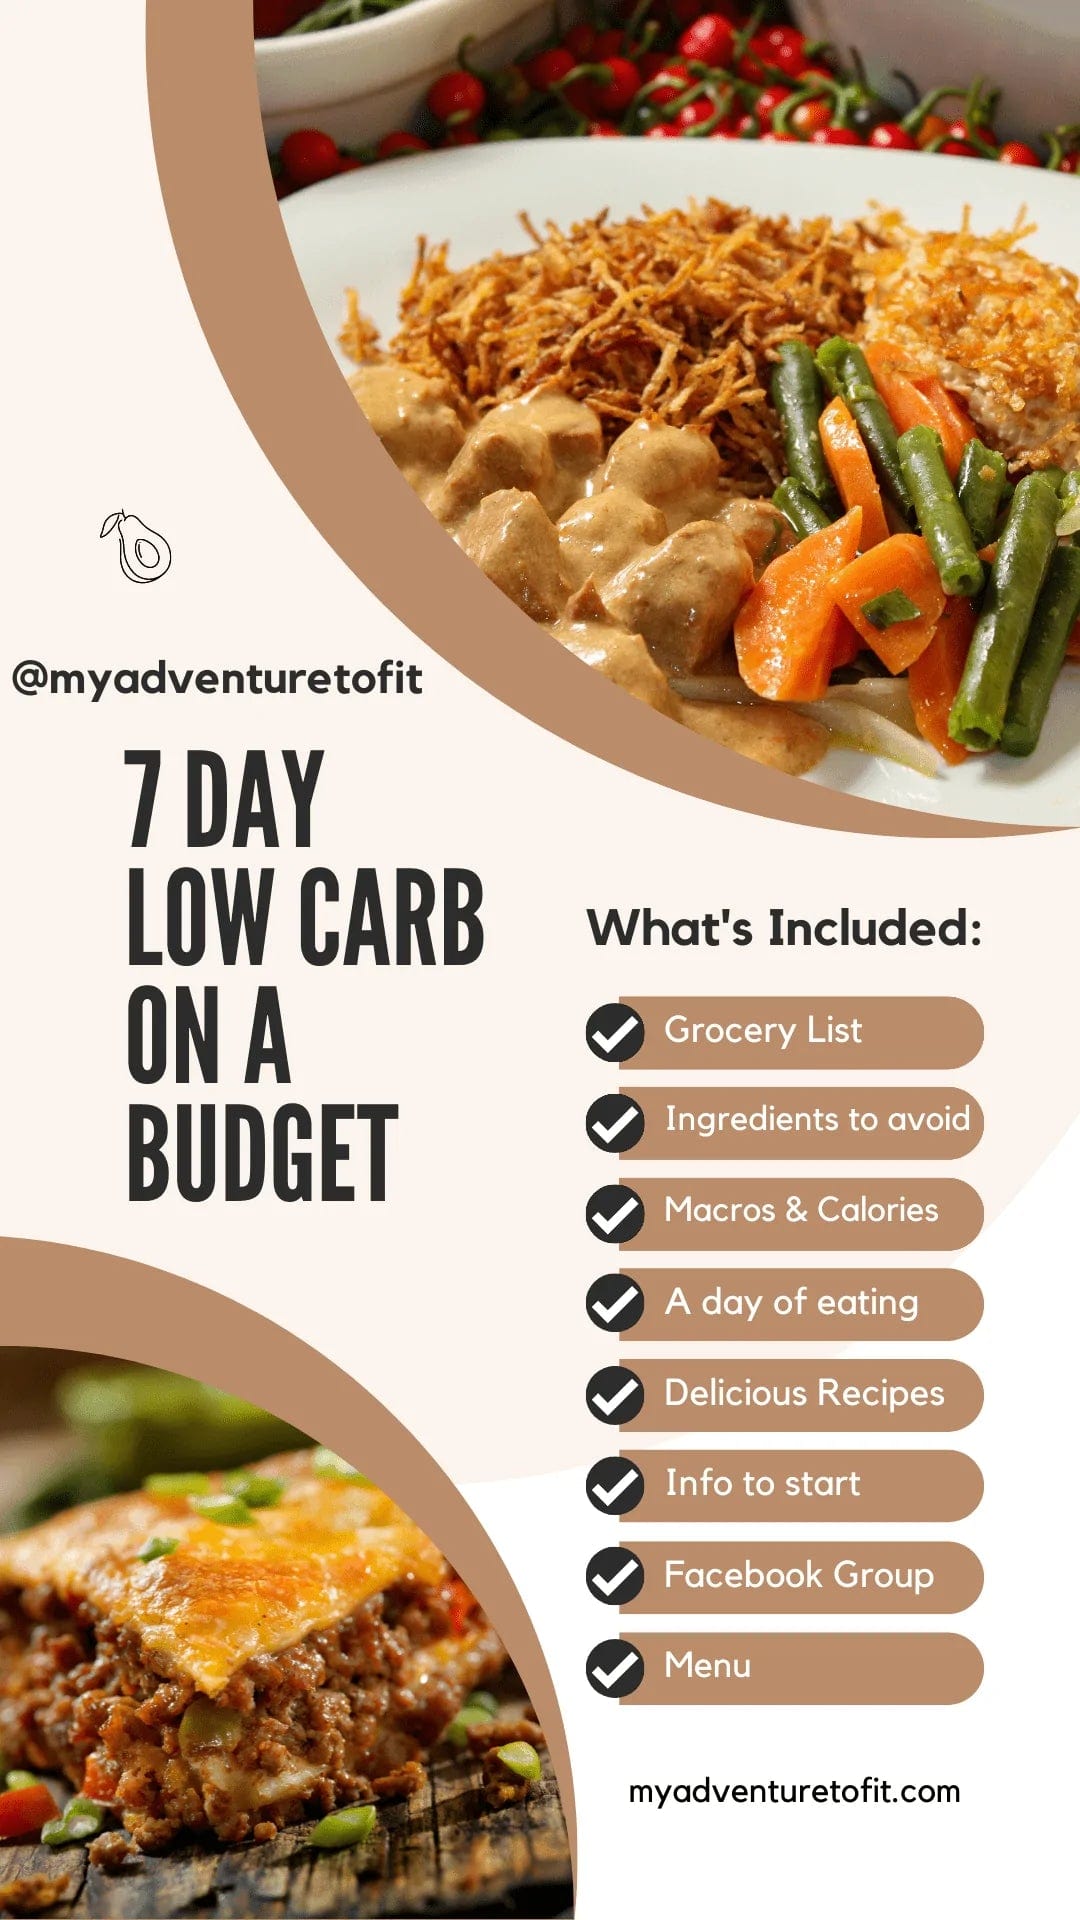 Low Carb Meal Plan on a Budget - Instant Delivery to your email - My Adventure to Fit